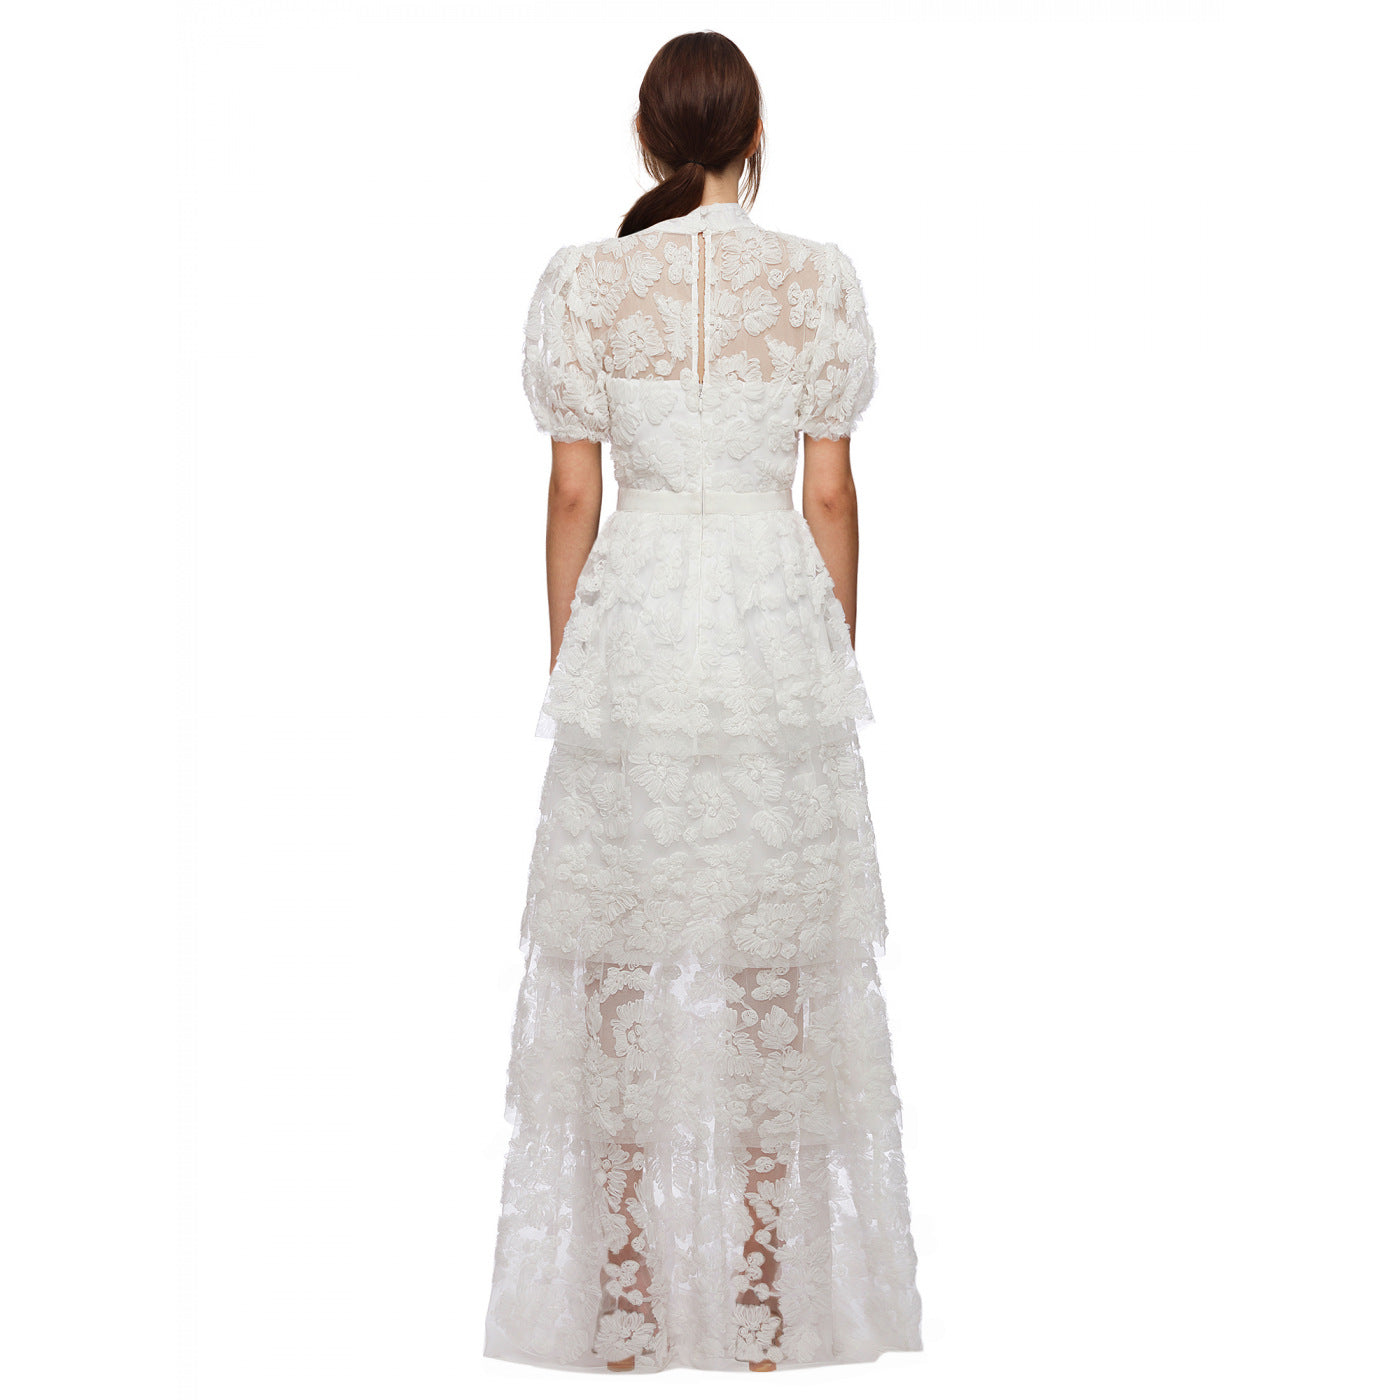 A woman wearing the Ribbon Lace Tiered Maxi Dress